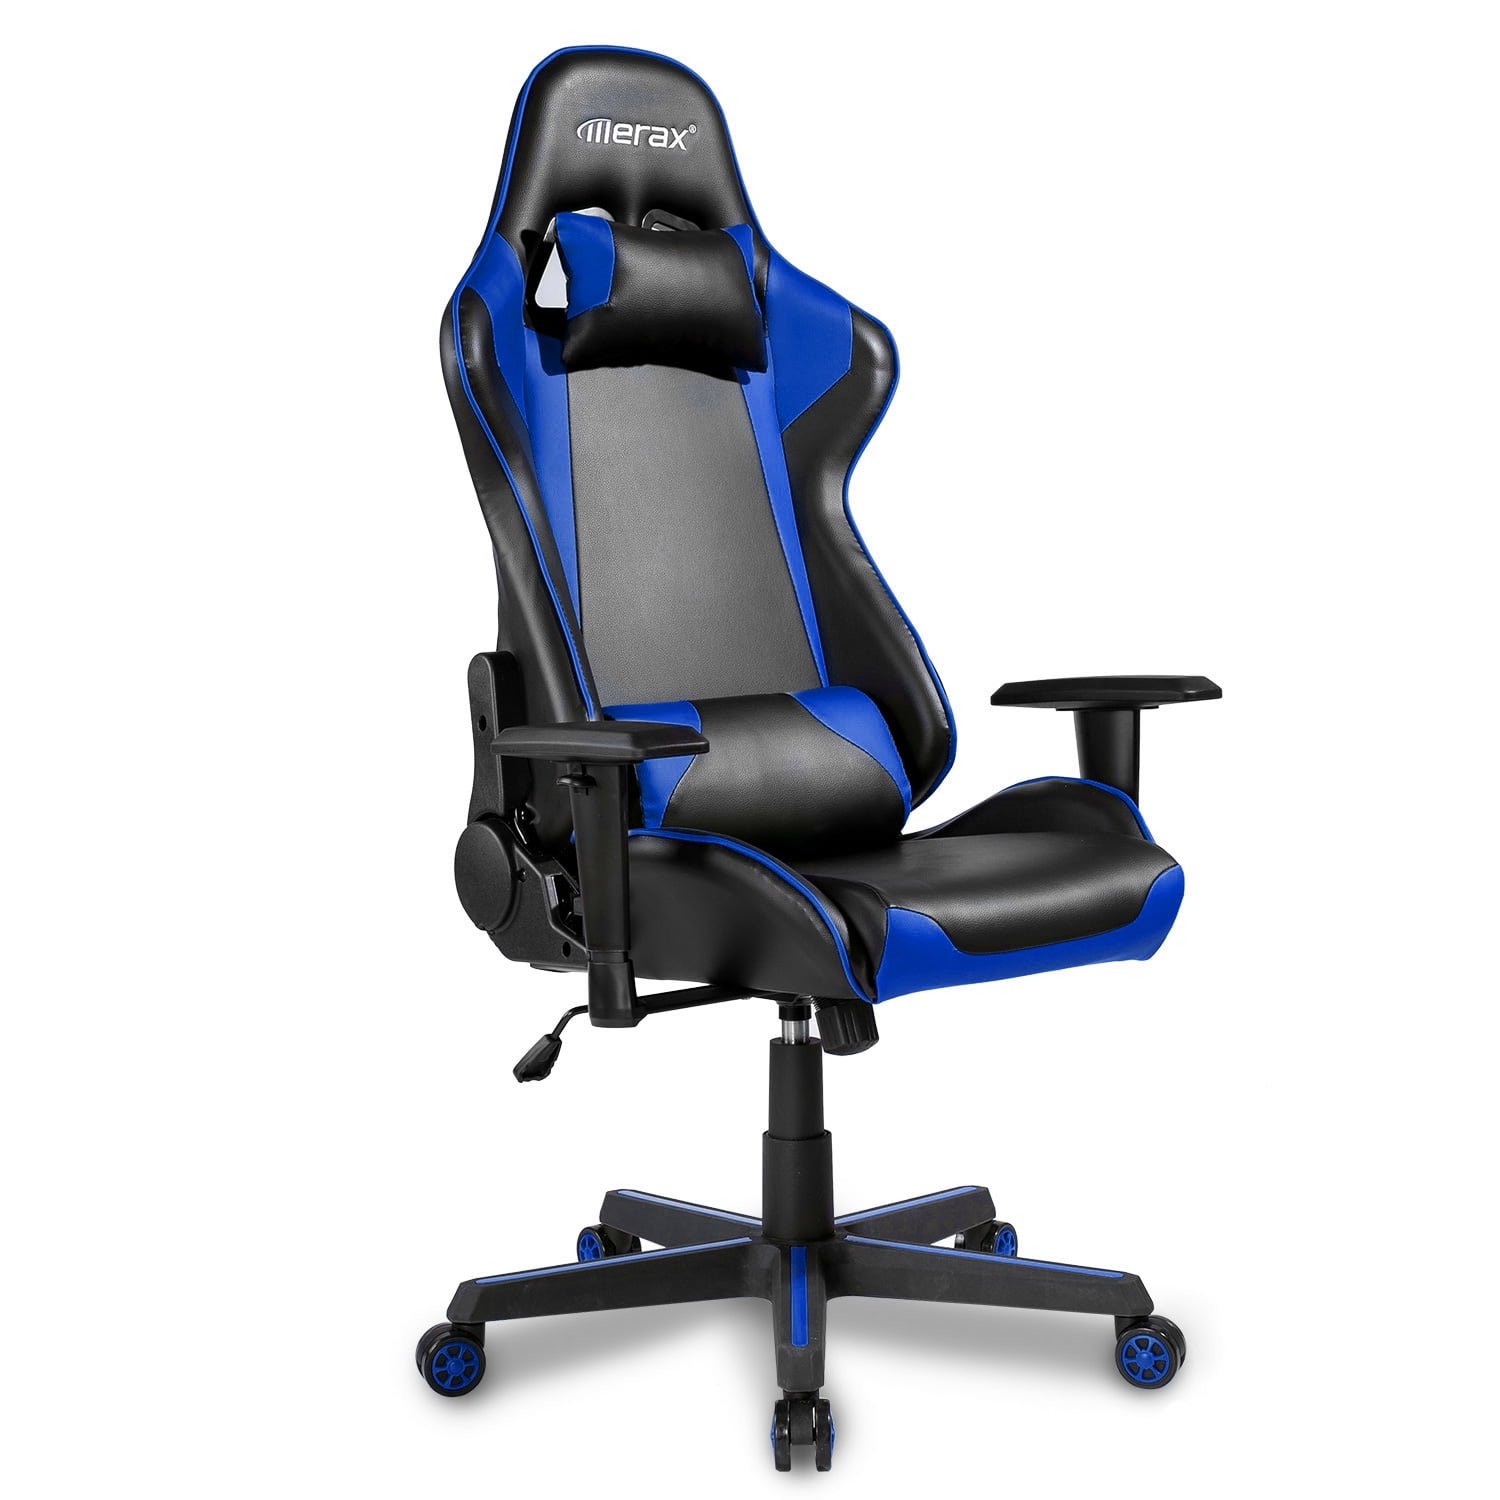 Black,Sky Blue Recliner RX Gaming Chair Tilt Function,Tension Control,Swivel 